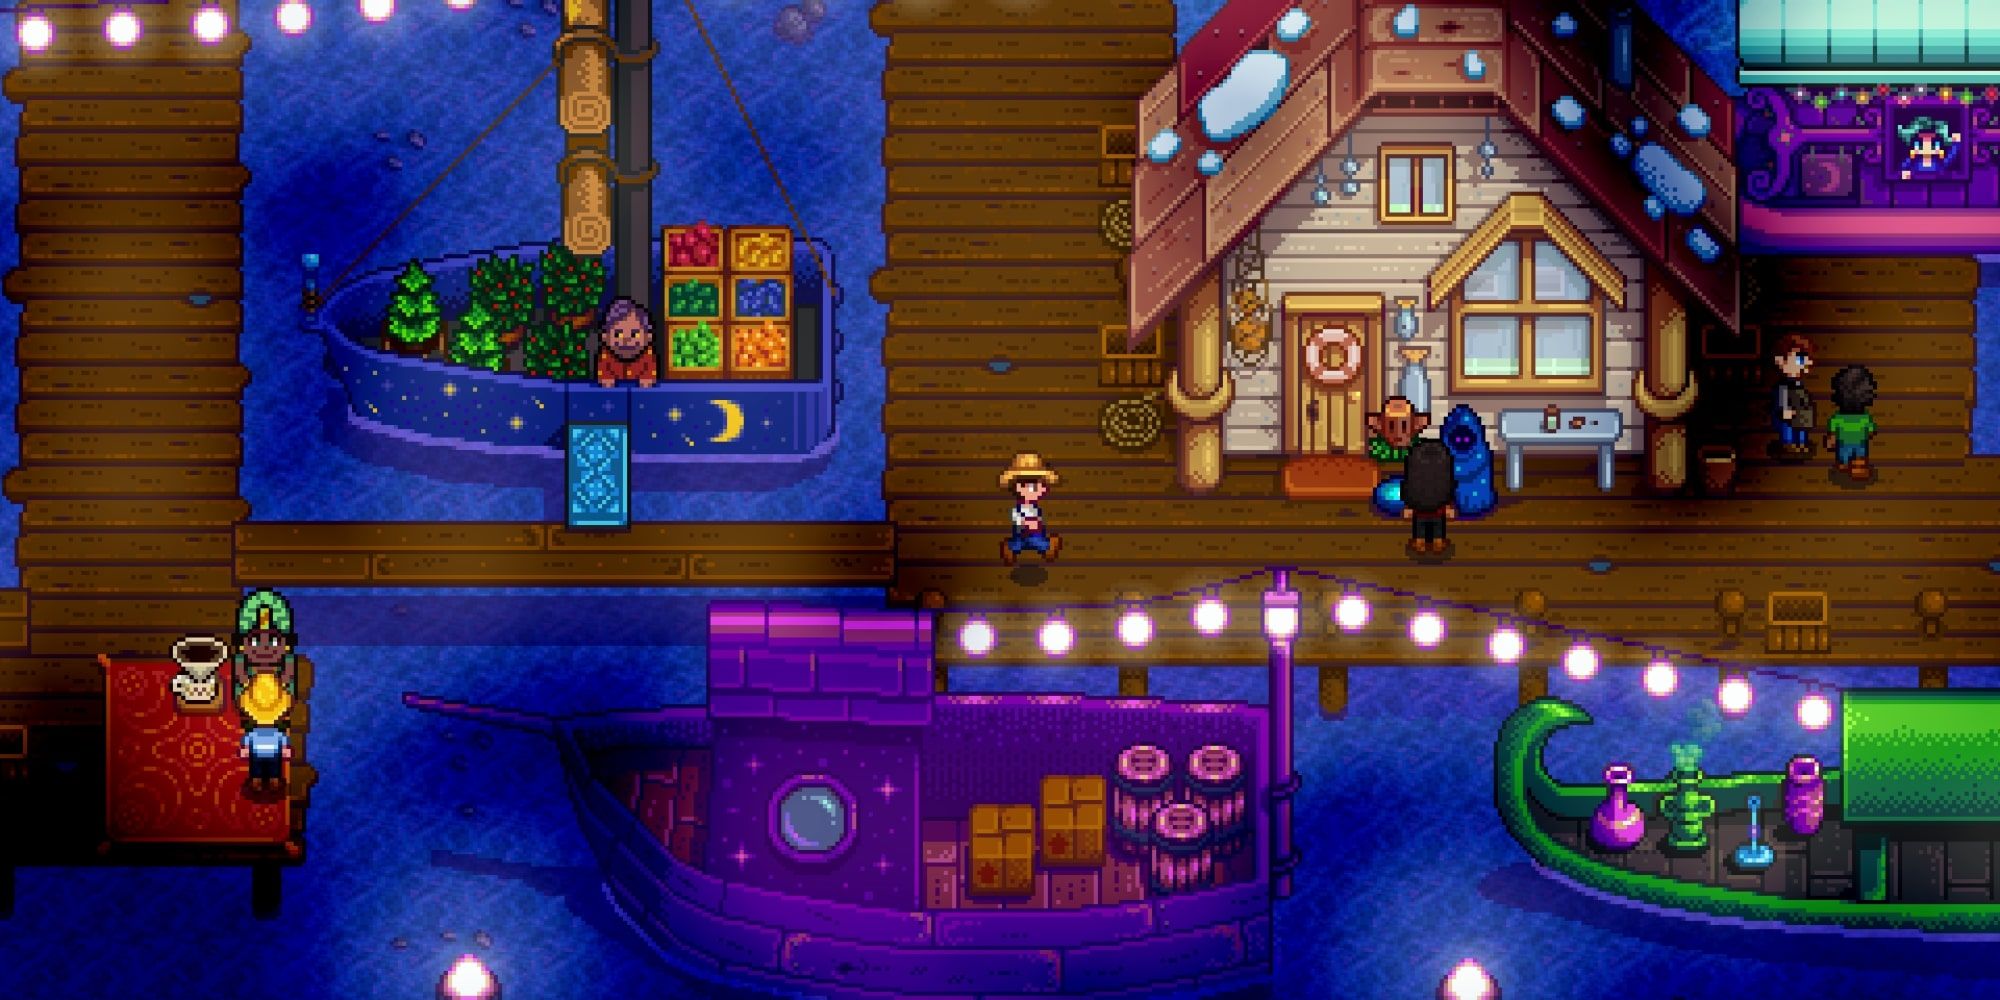 Farmer visits the docks at night in Stardew Valley